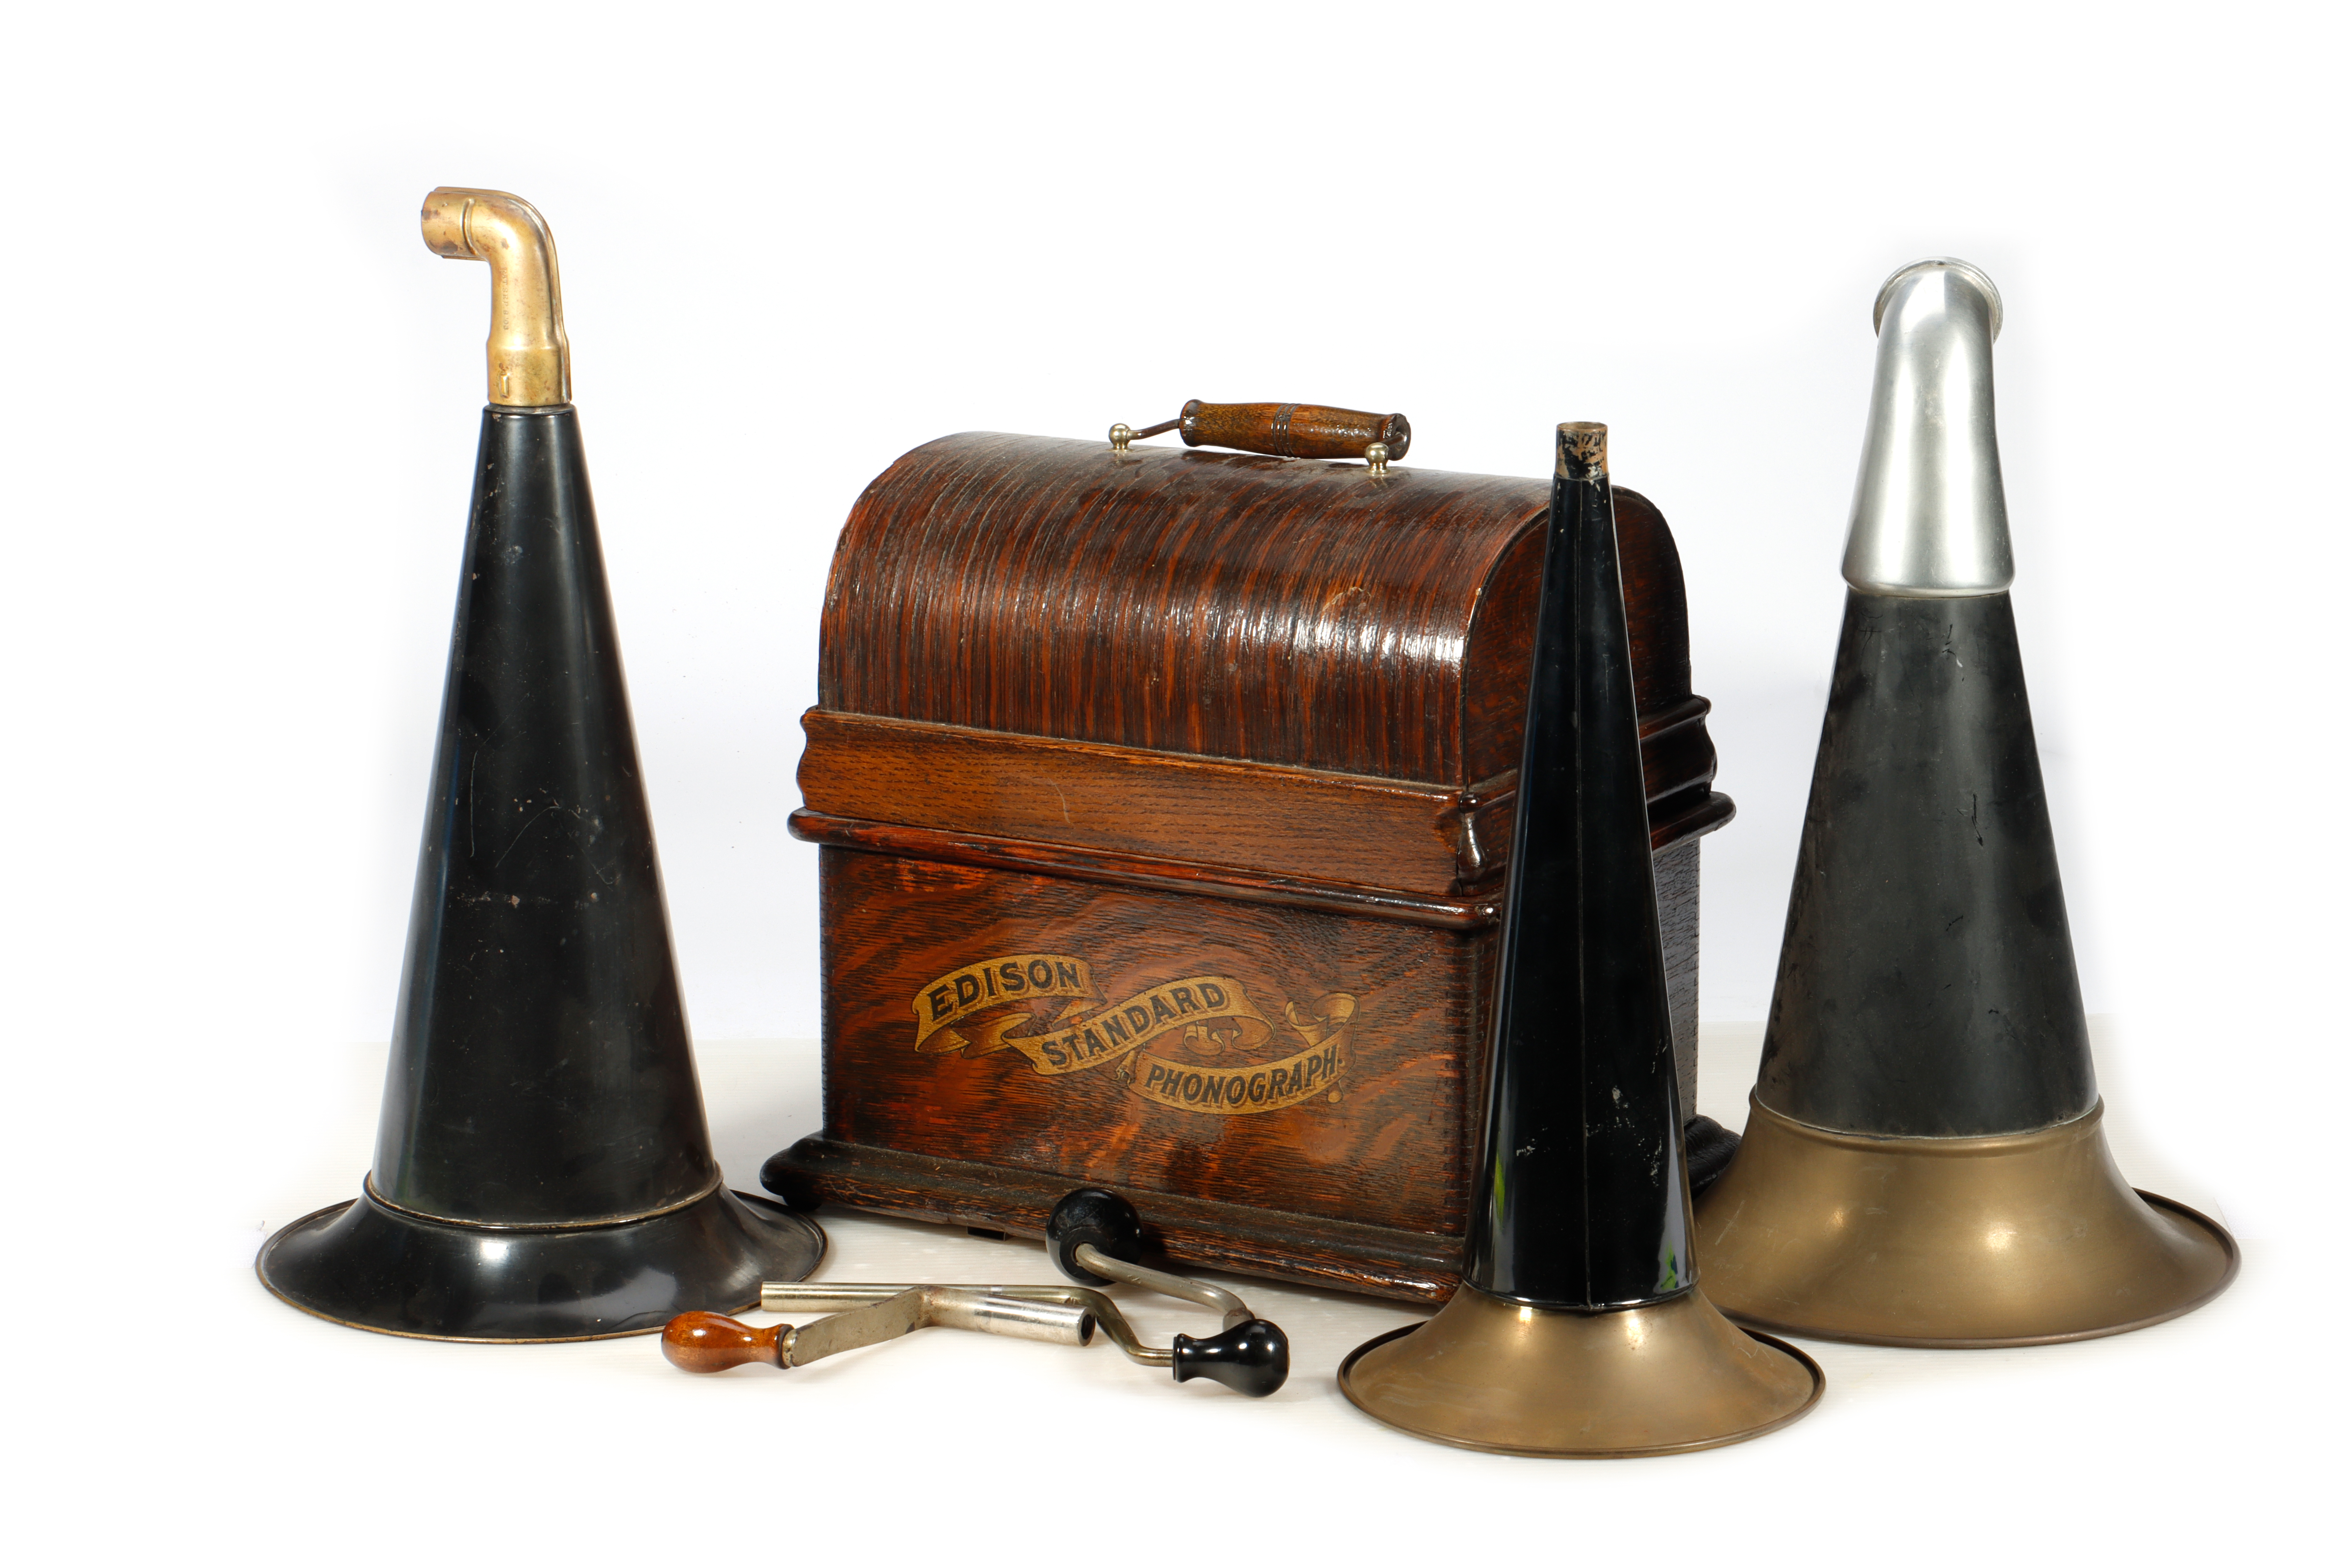  Group of antique phonographs and parts, est. $100-$200